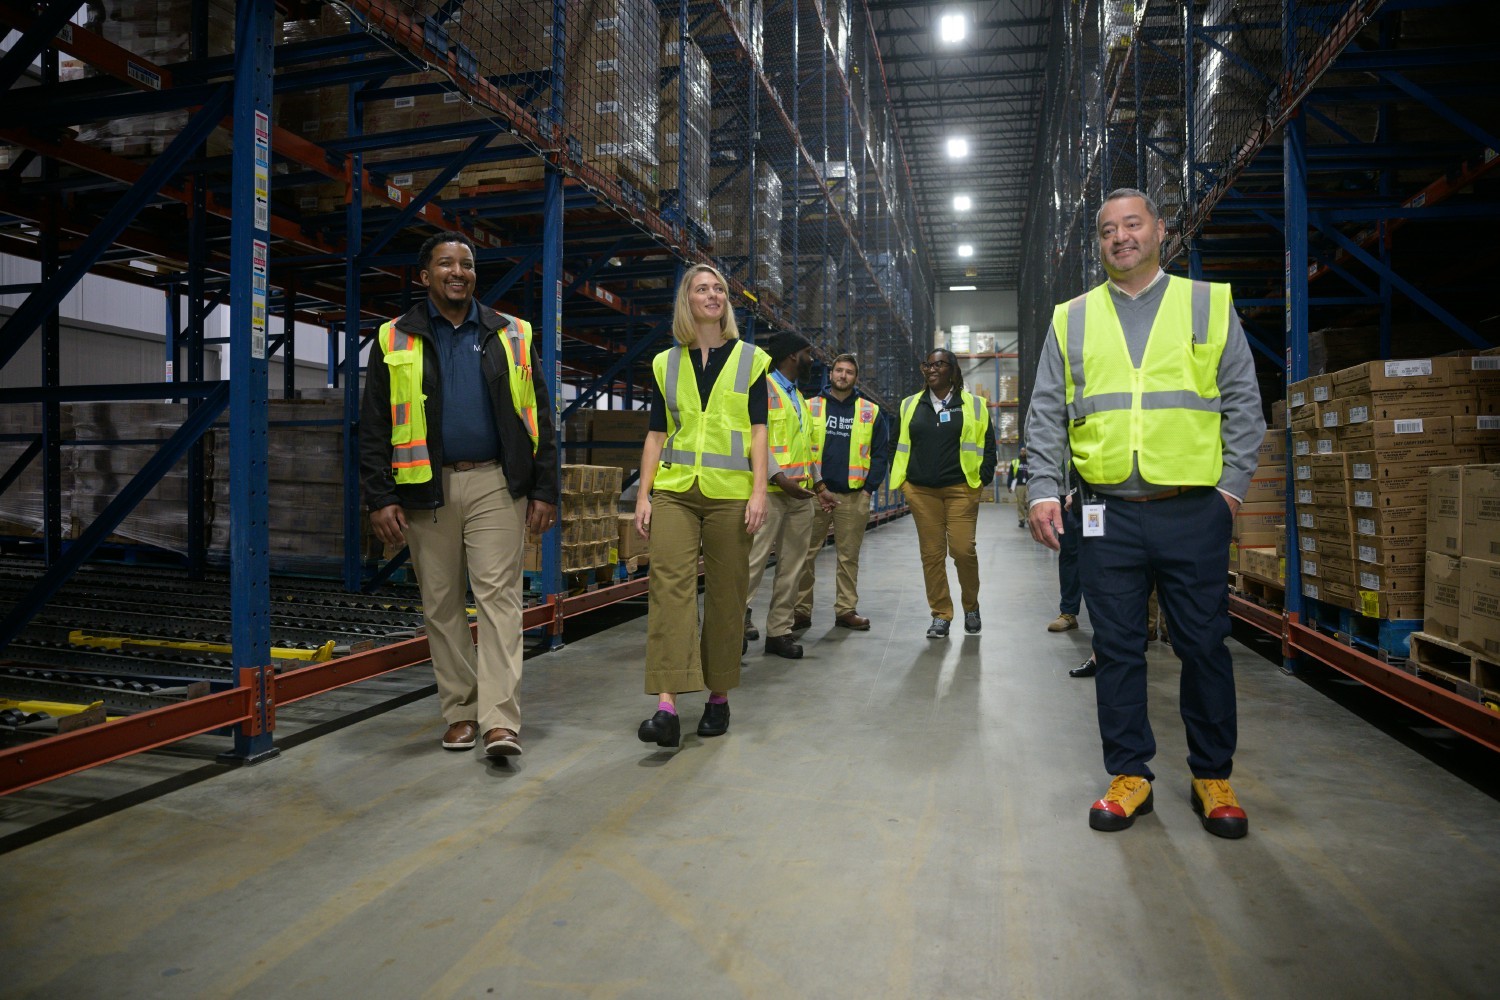  Sarah, our CEO walking through one of our 27 distribution centers with distribution team members.